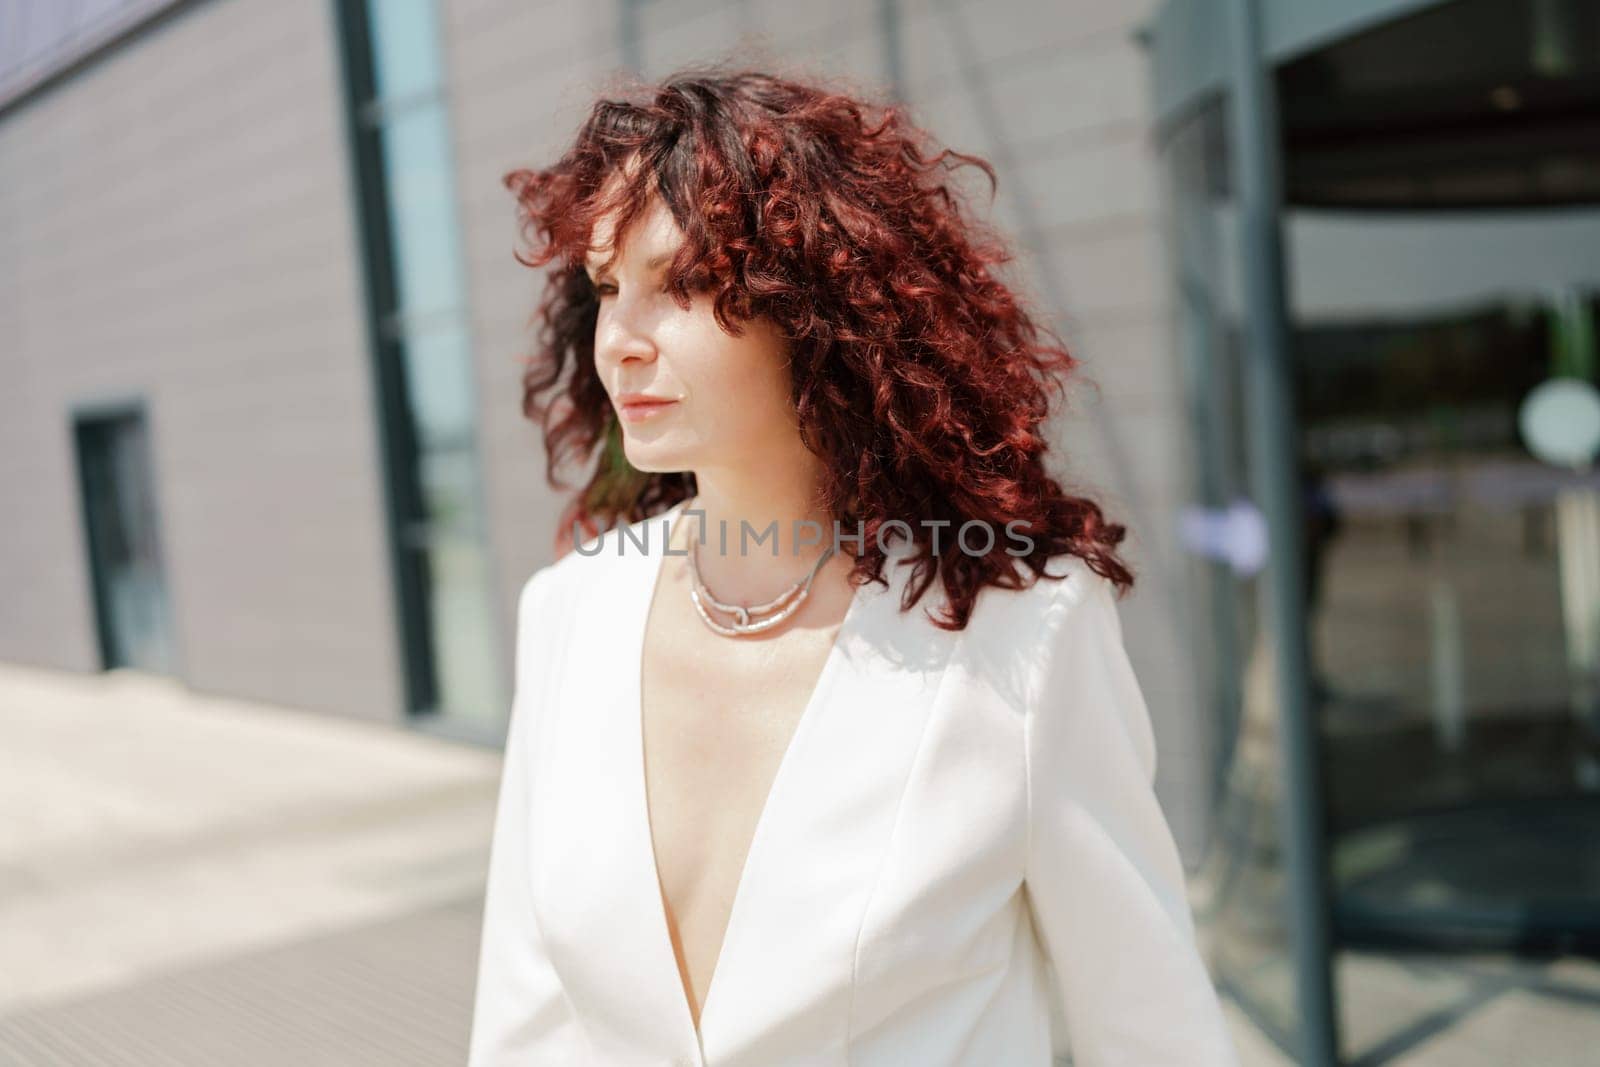 Portrait of a woman standing near a supermarket building. Caucasian model with long dark hair, wearing a white jacket and colored trousers